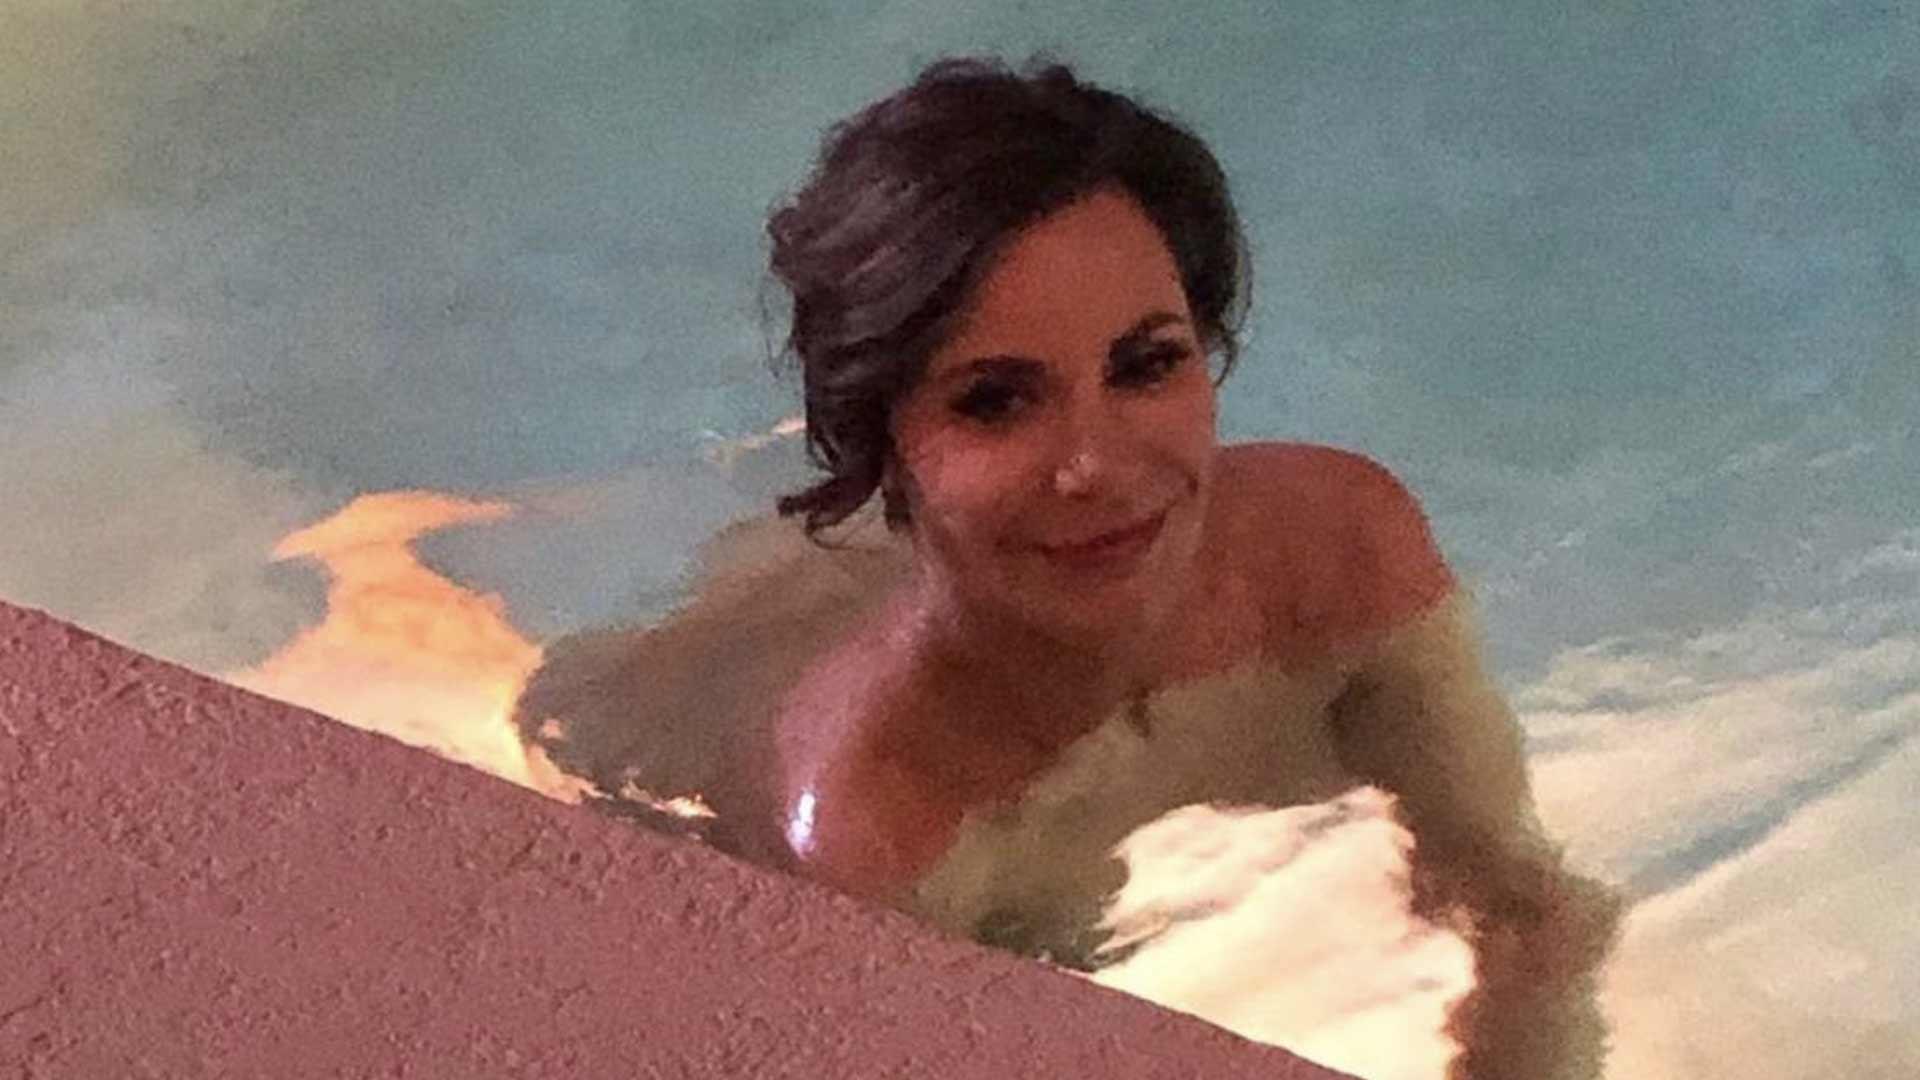 ‘RHONY’ Star Luann de Lesseps Cools Down With Skinny Dip After Scolding from Probation Officer